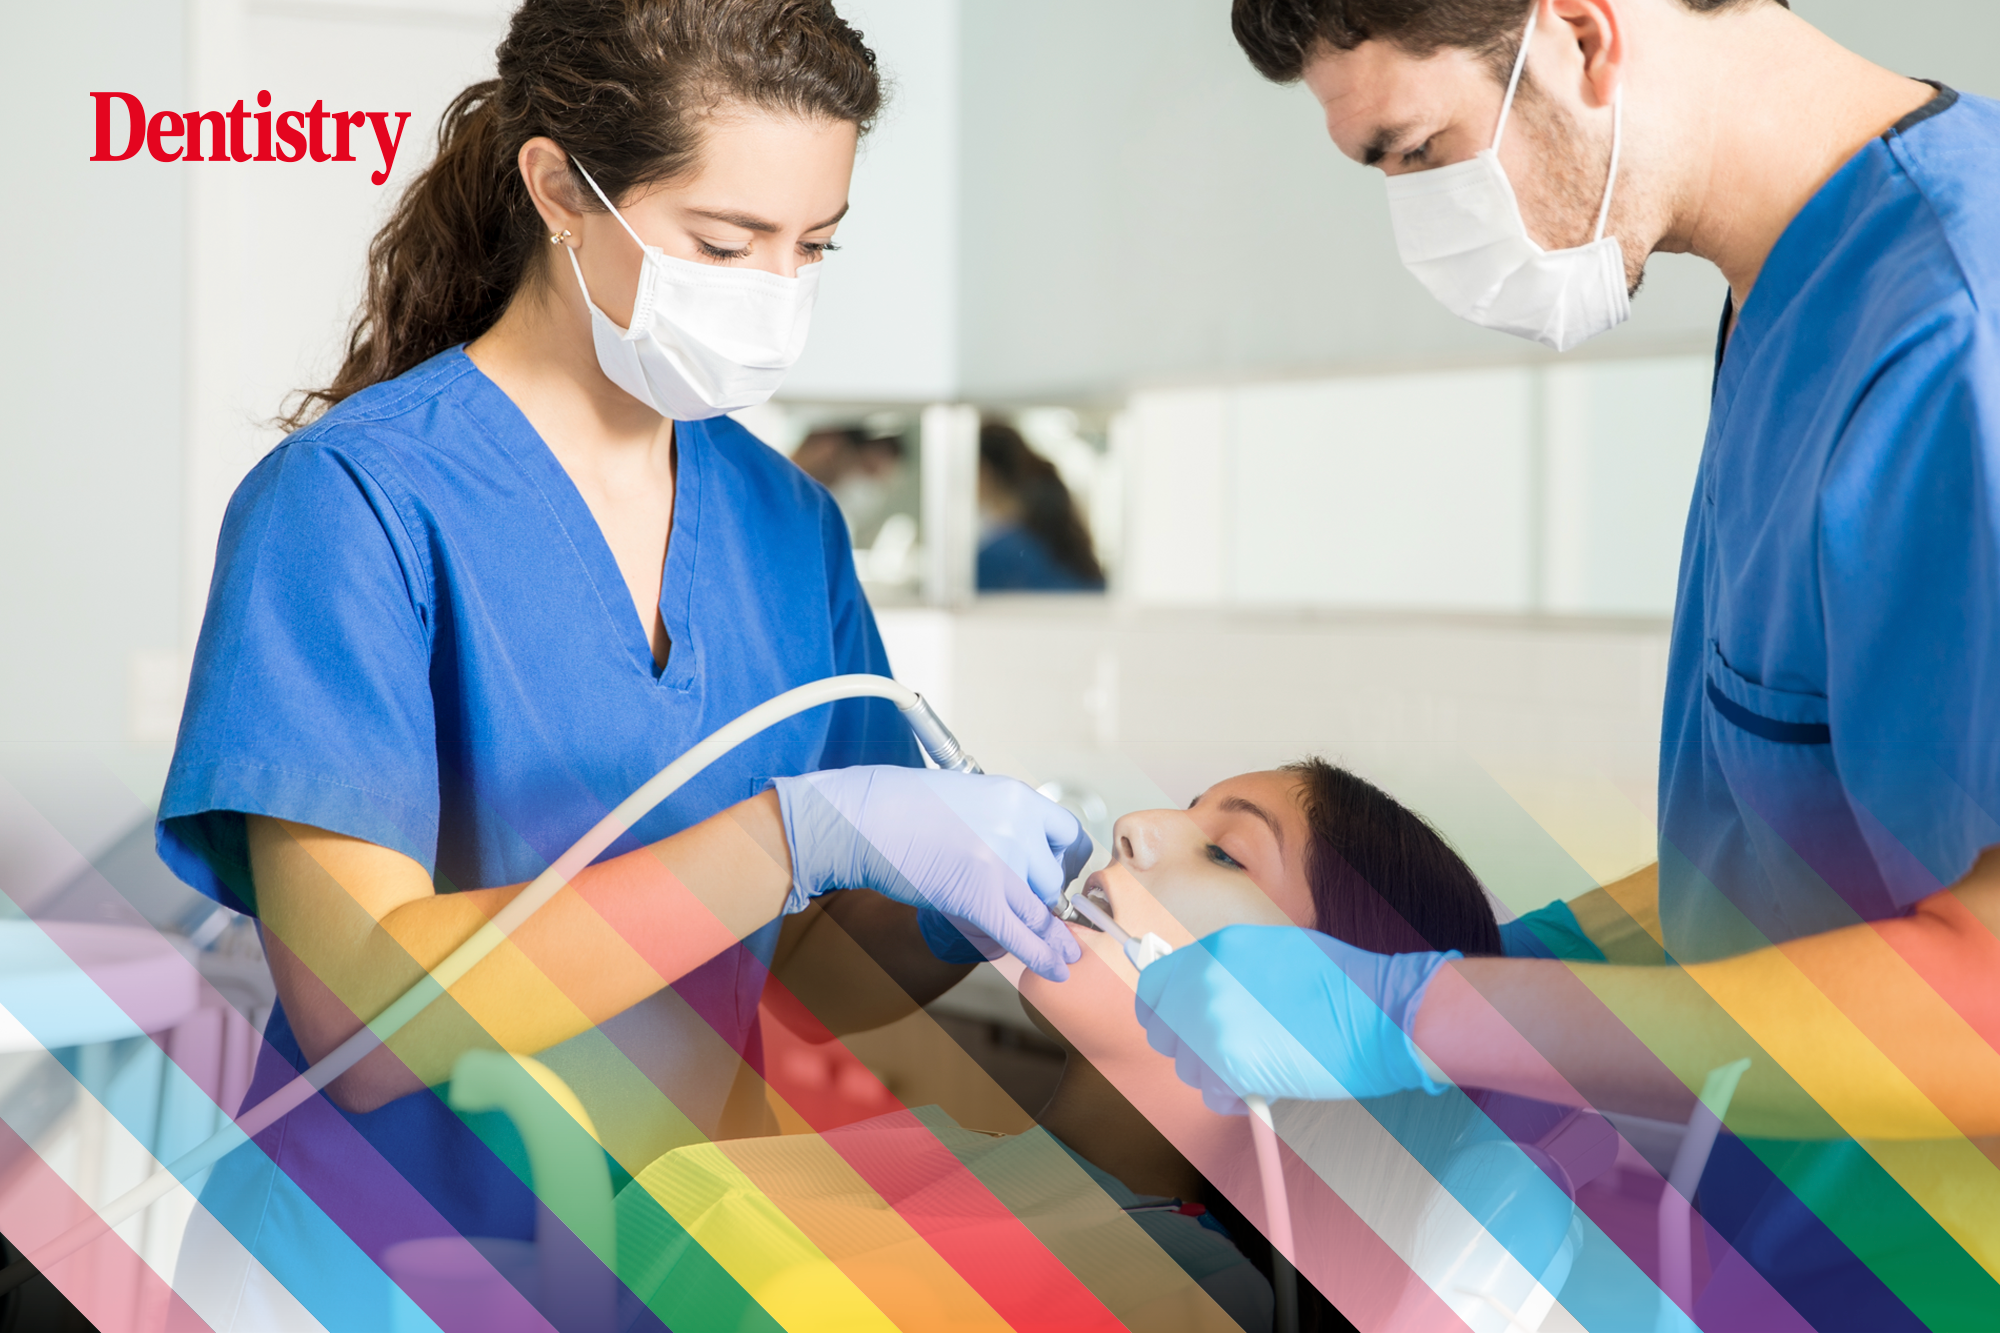 How has dentistry changed for LGBTQ+ professionals?